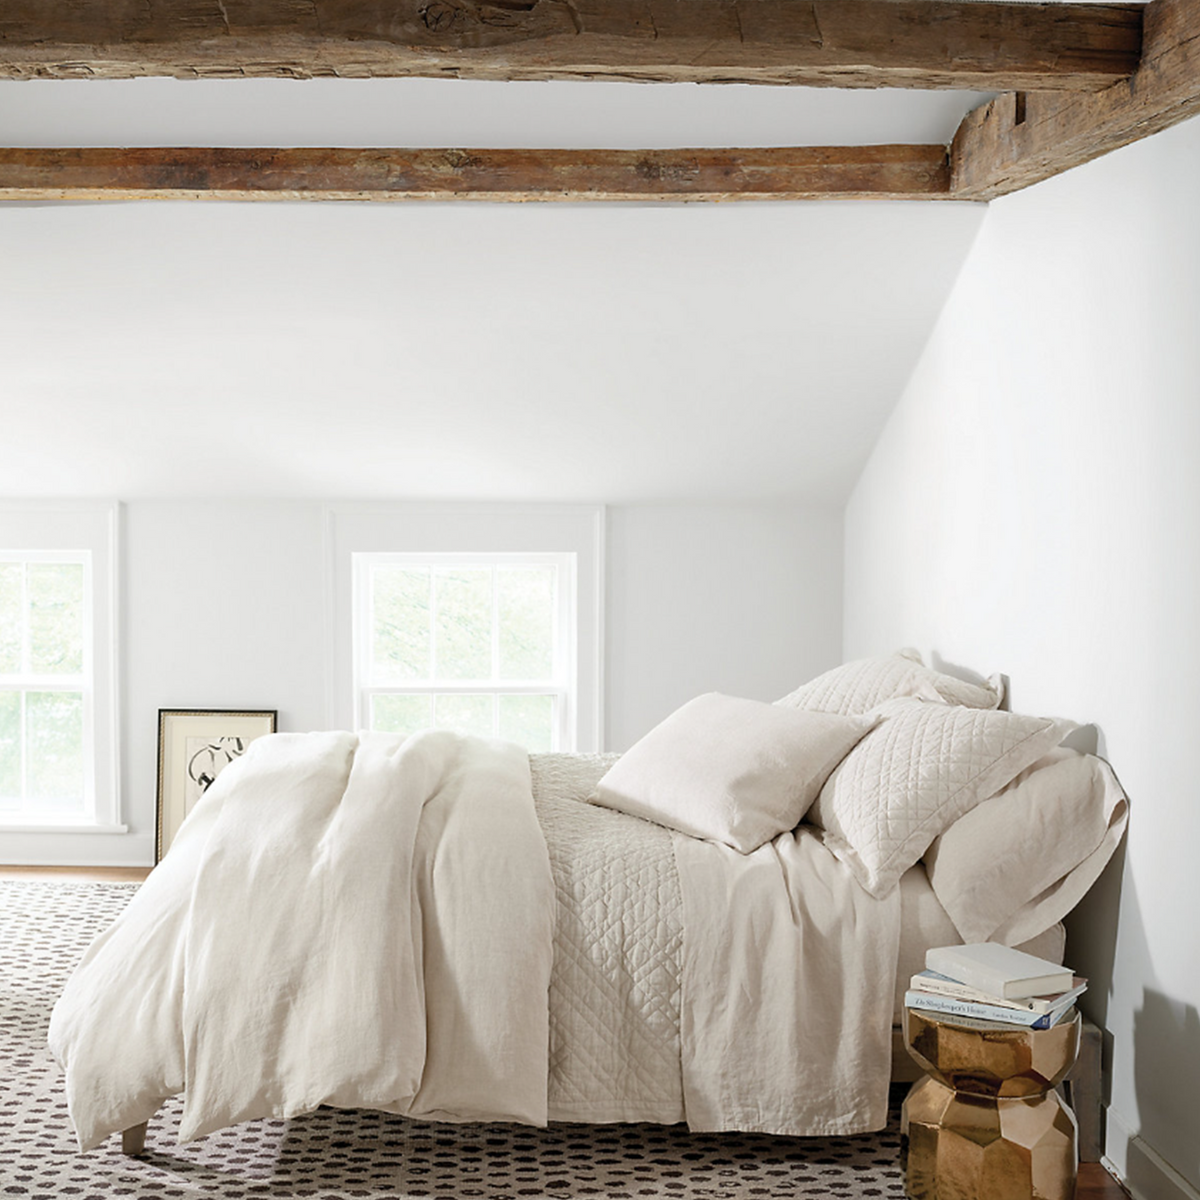 Bed Dressed in Pine Cone Hill Washed Linen Quilted Bedding in Color Natural